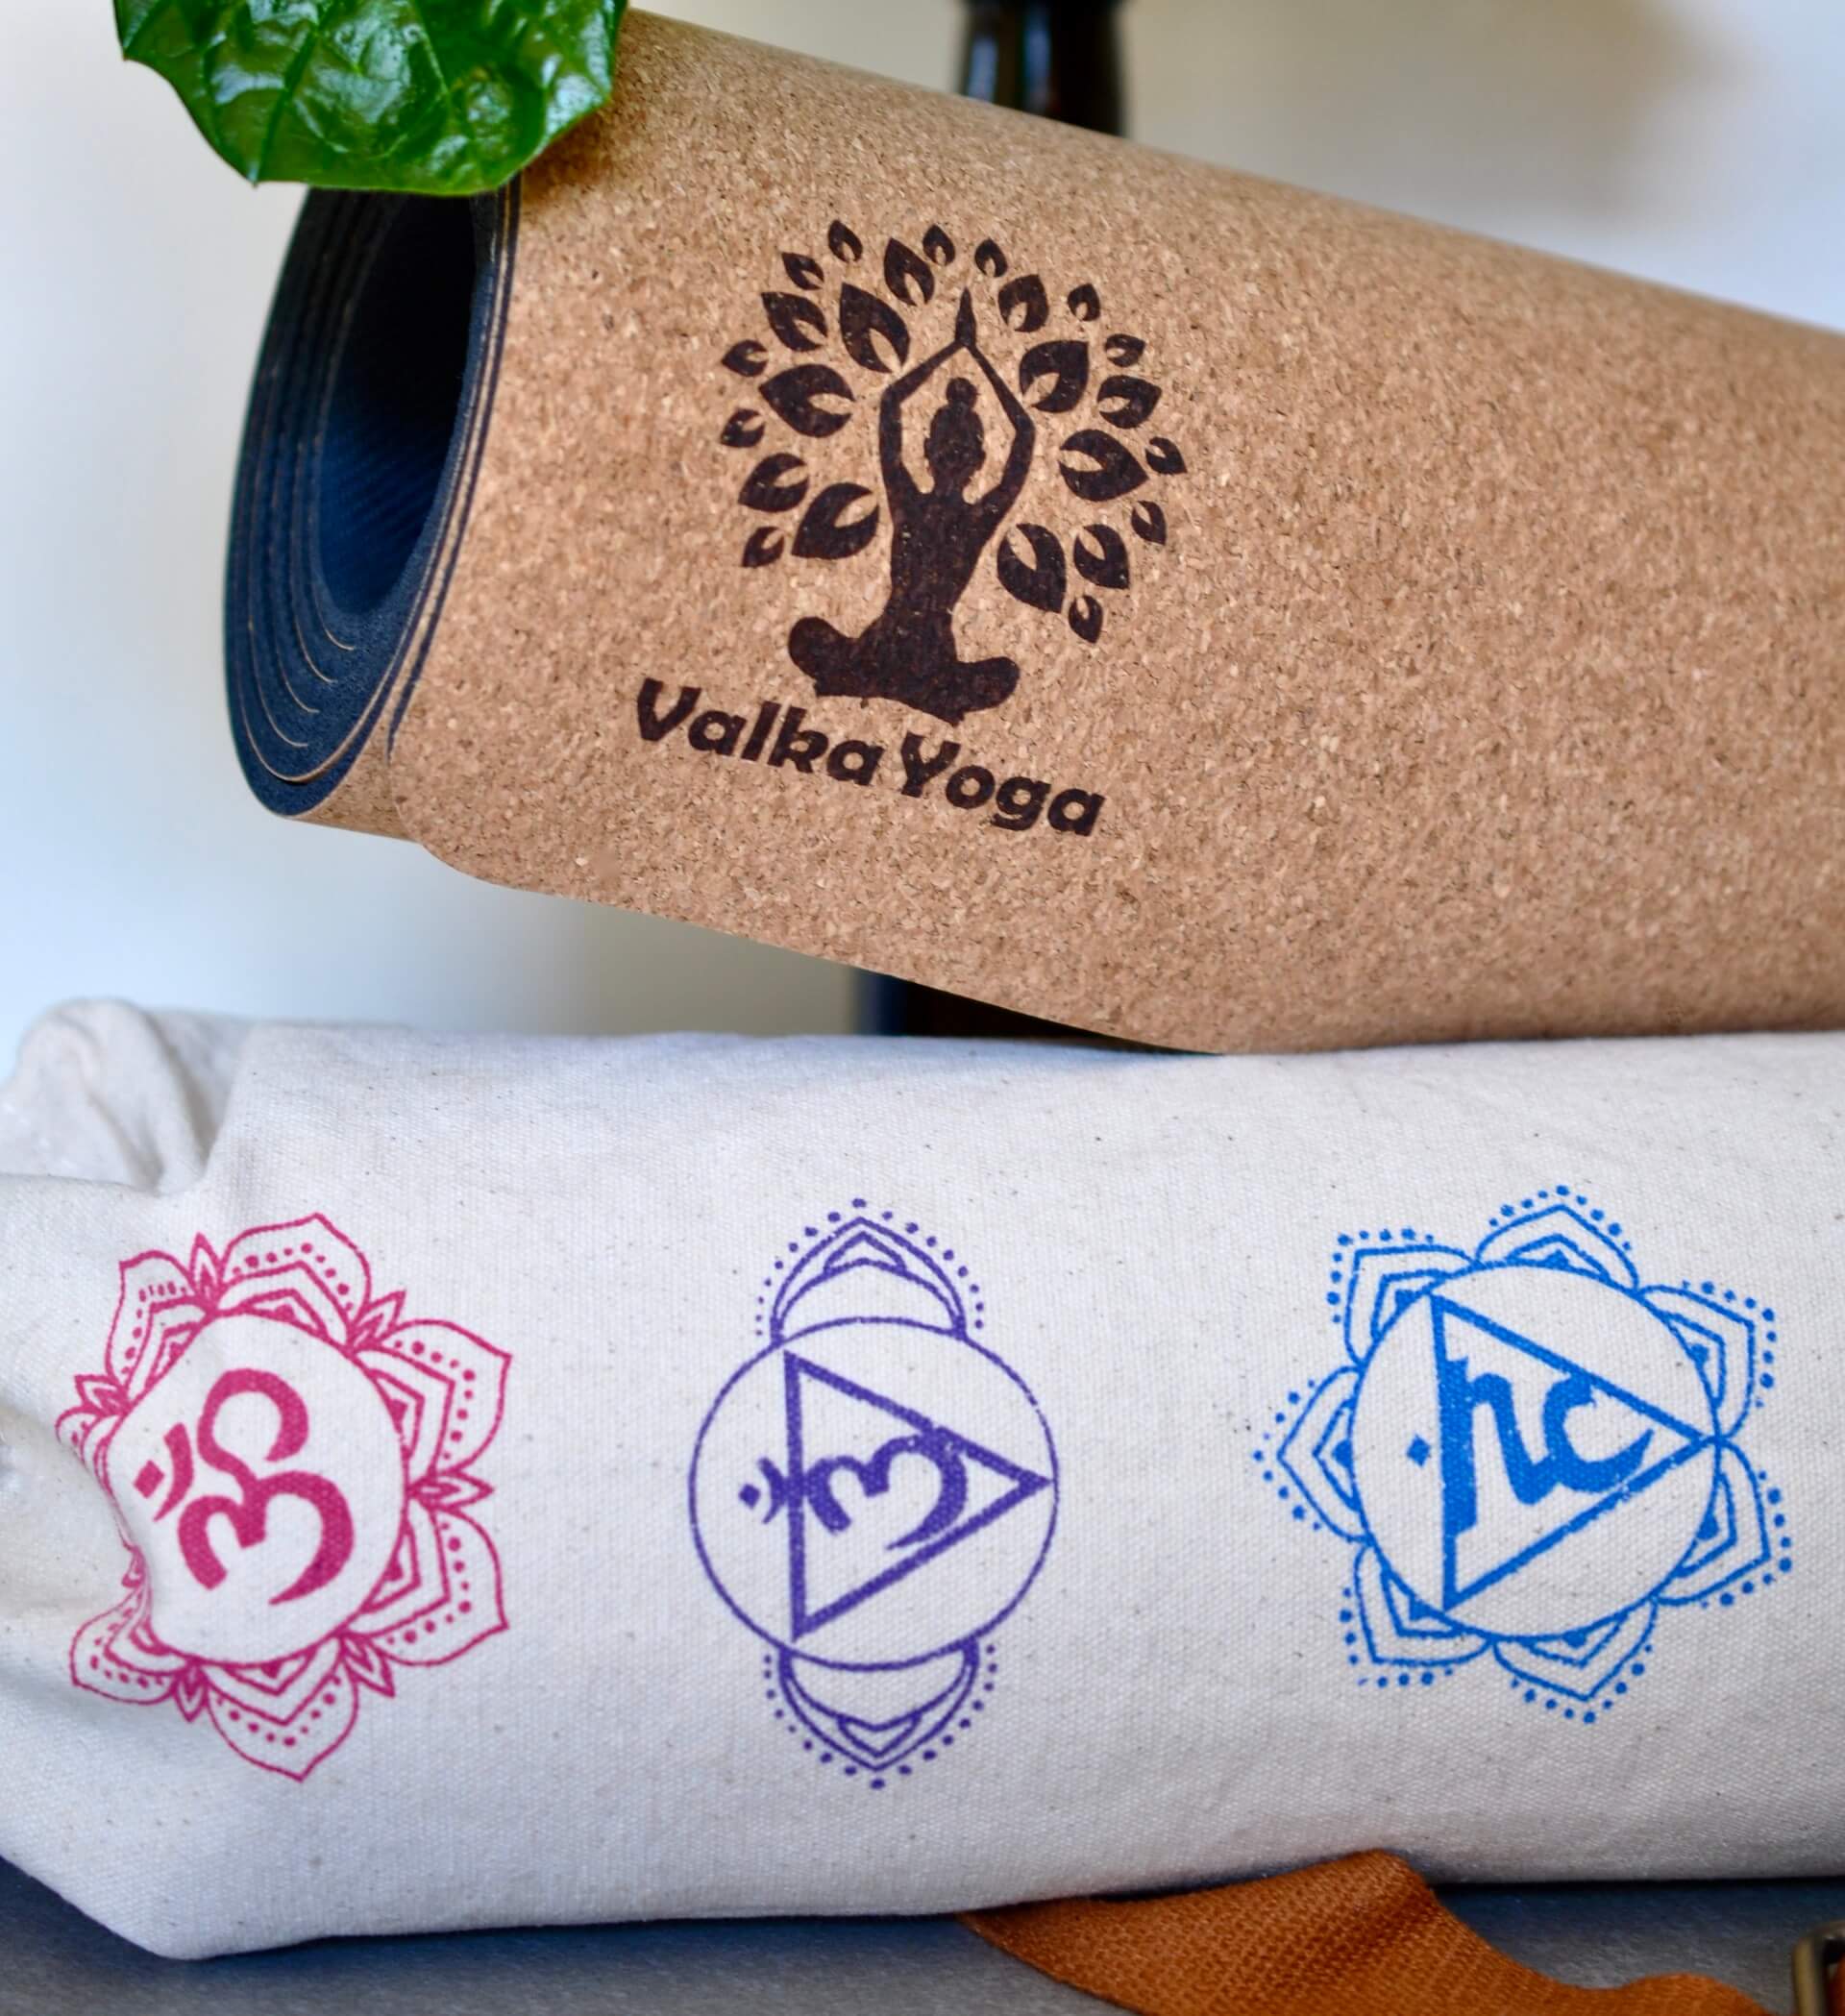 Yoga Mat and Carry Bag Set by Valka Yoga New Zealand